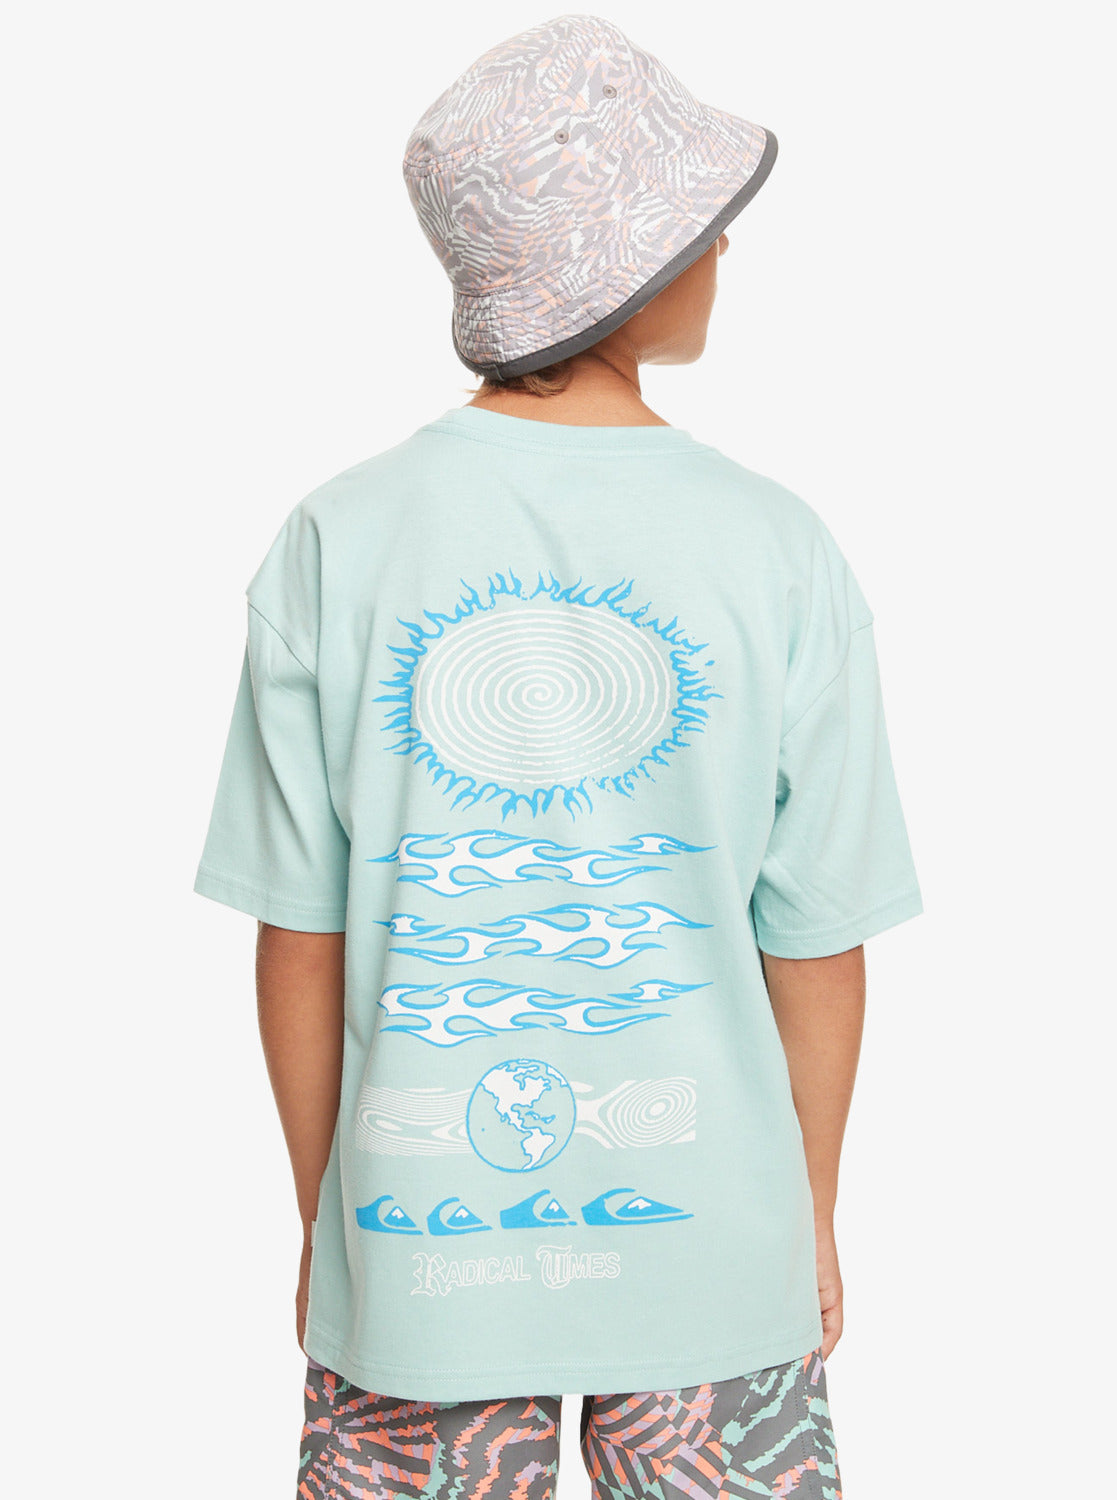 Boy in a bucket hat wearing the Quiksilver Visions Youth Tee in pastel turquoise from back